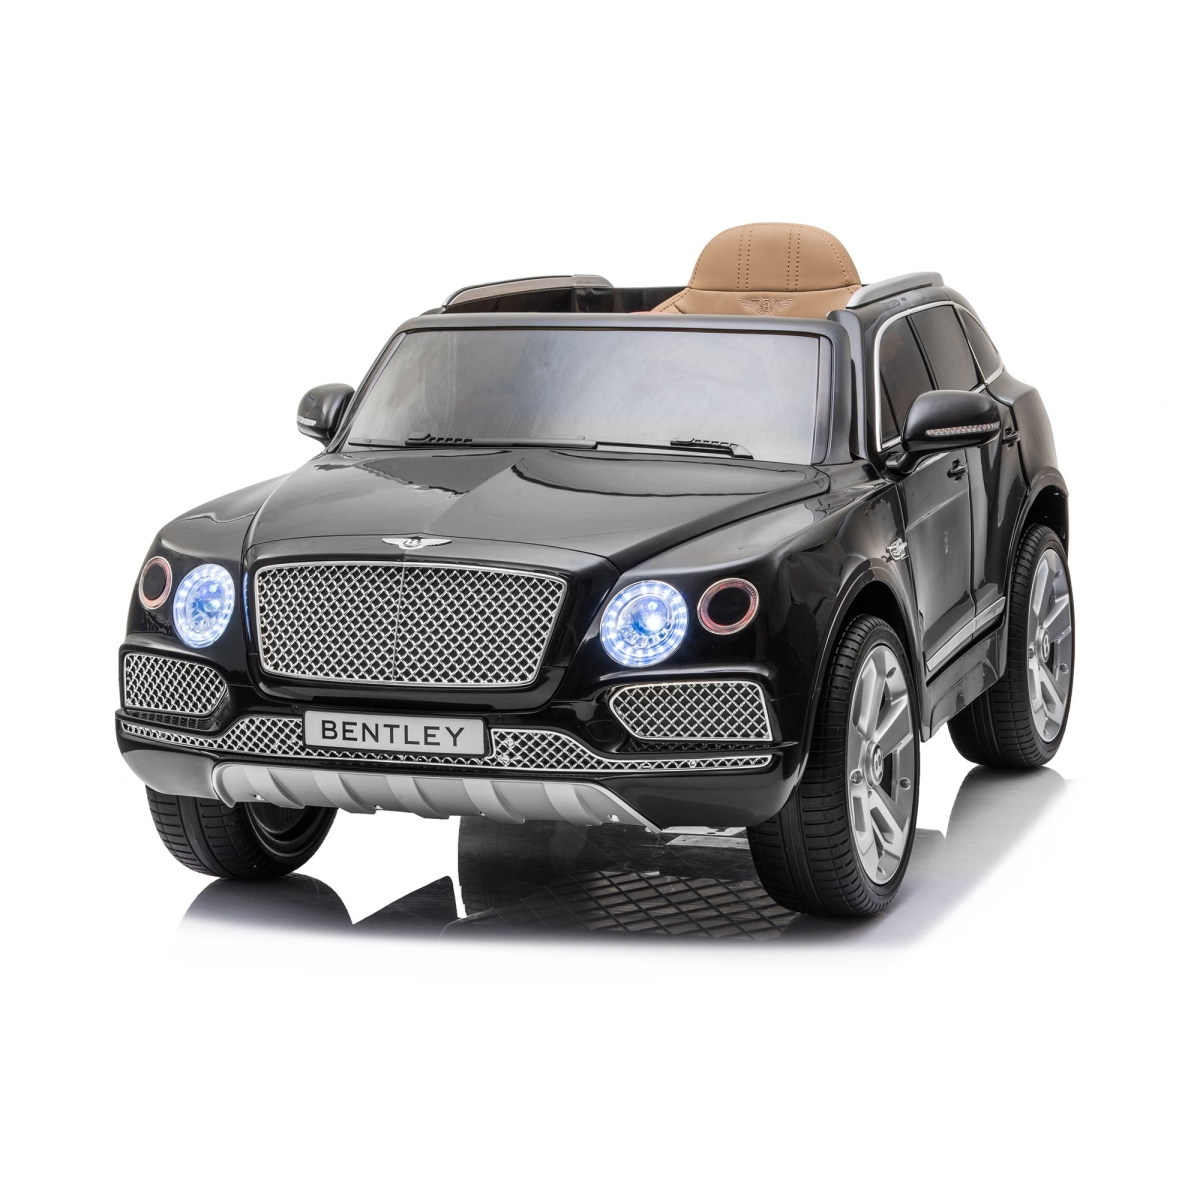 Picture of 212 Main JJ2158BLACK 12V Bentley Bentayga 1 Seater Ride On Toy Car, Black